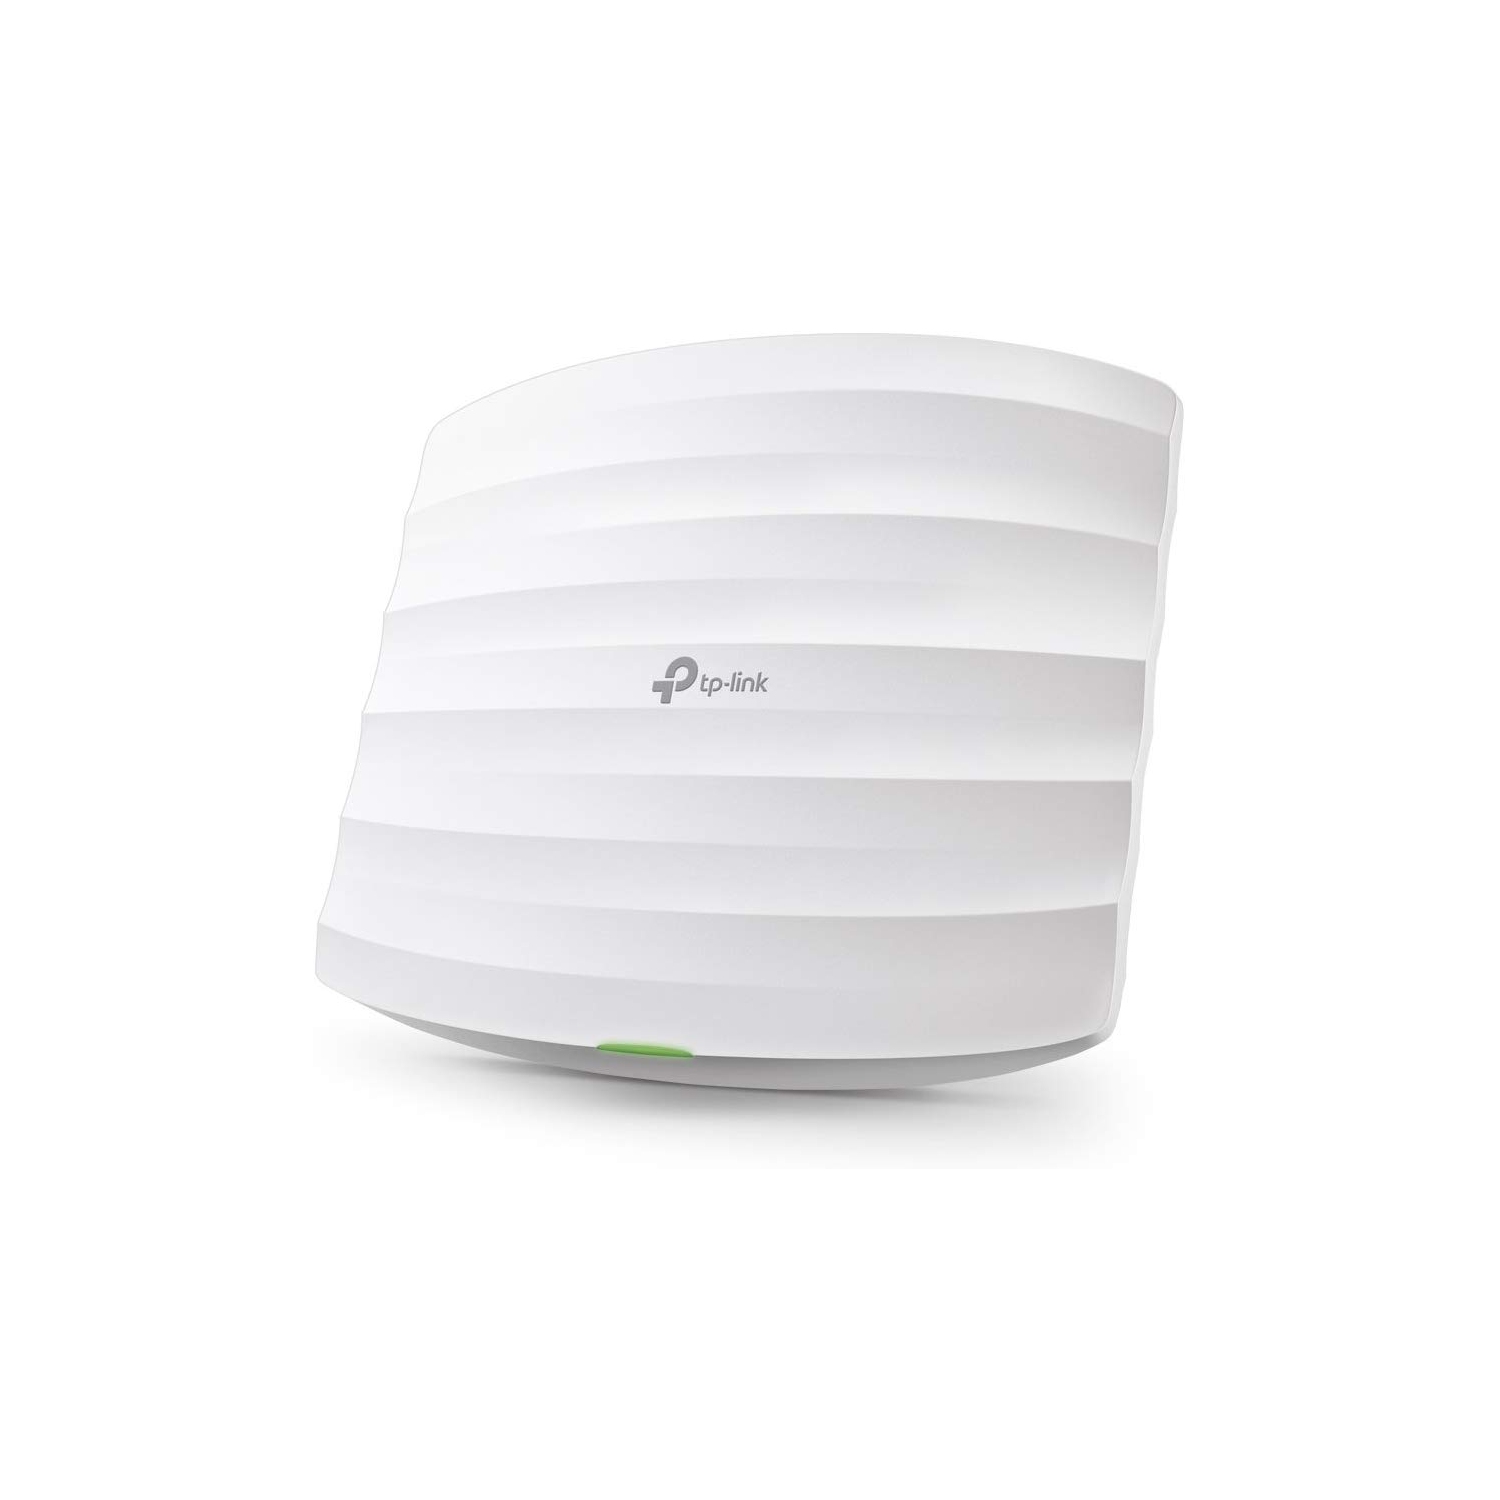 TP-Link EAP245 V3 Wireless AC1750 MU-MIMO Gigabit Access Point Supports PoE and Passive PoE (Injector Included)